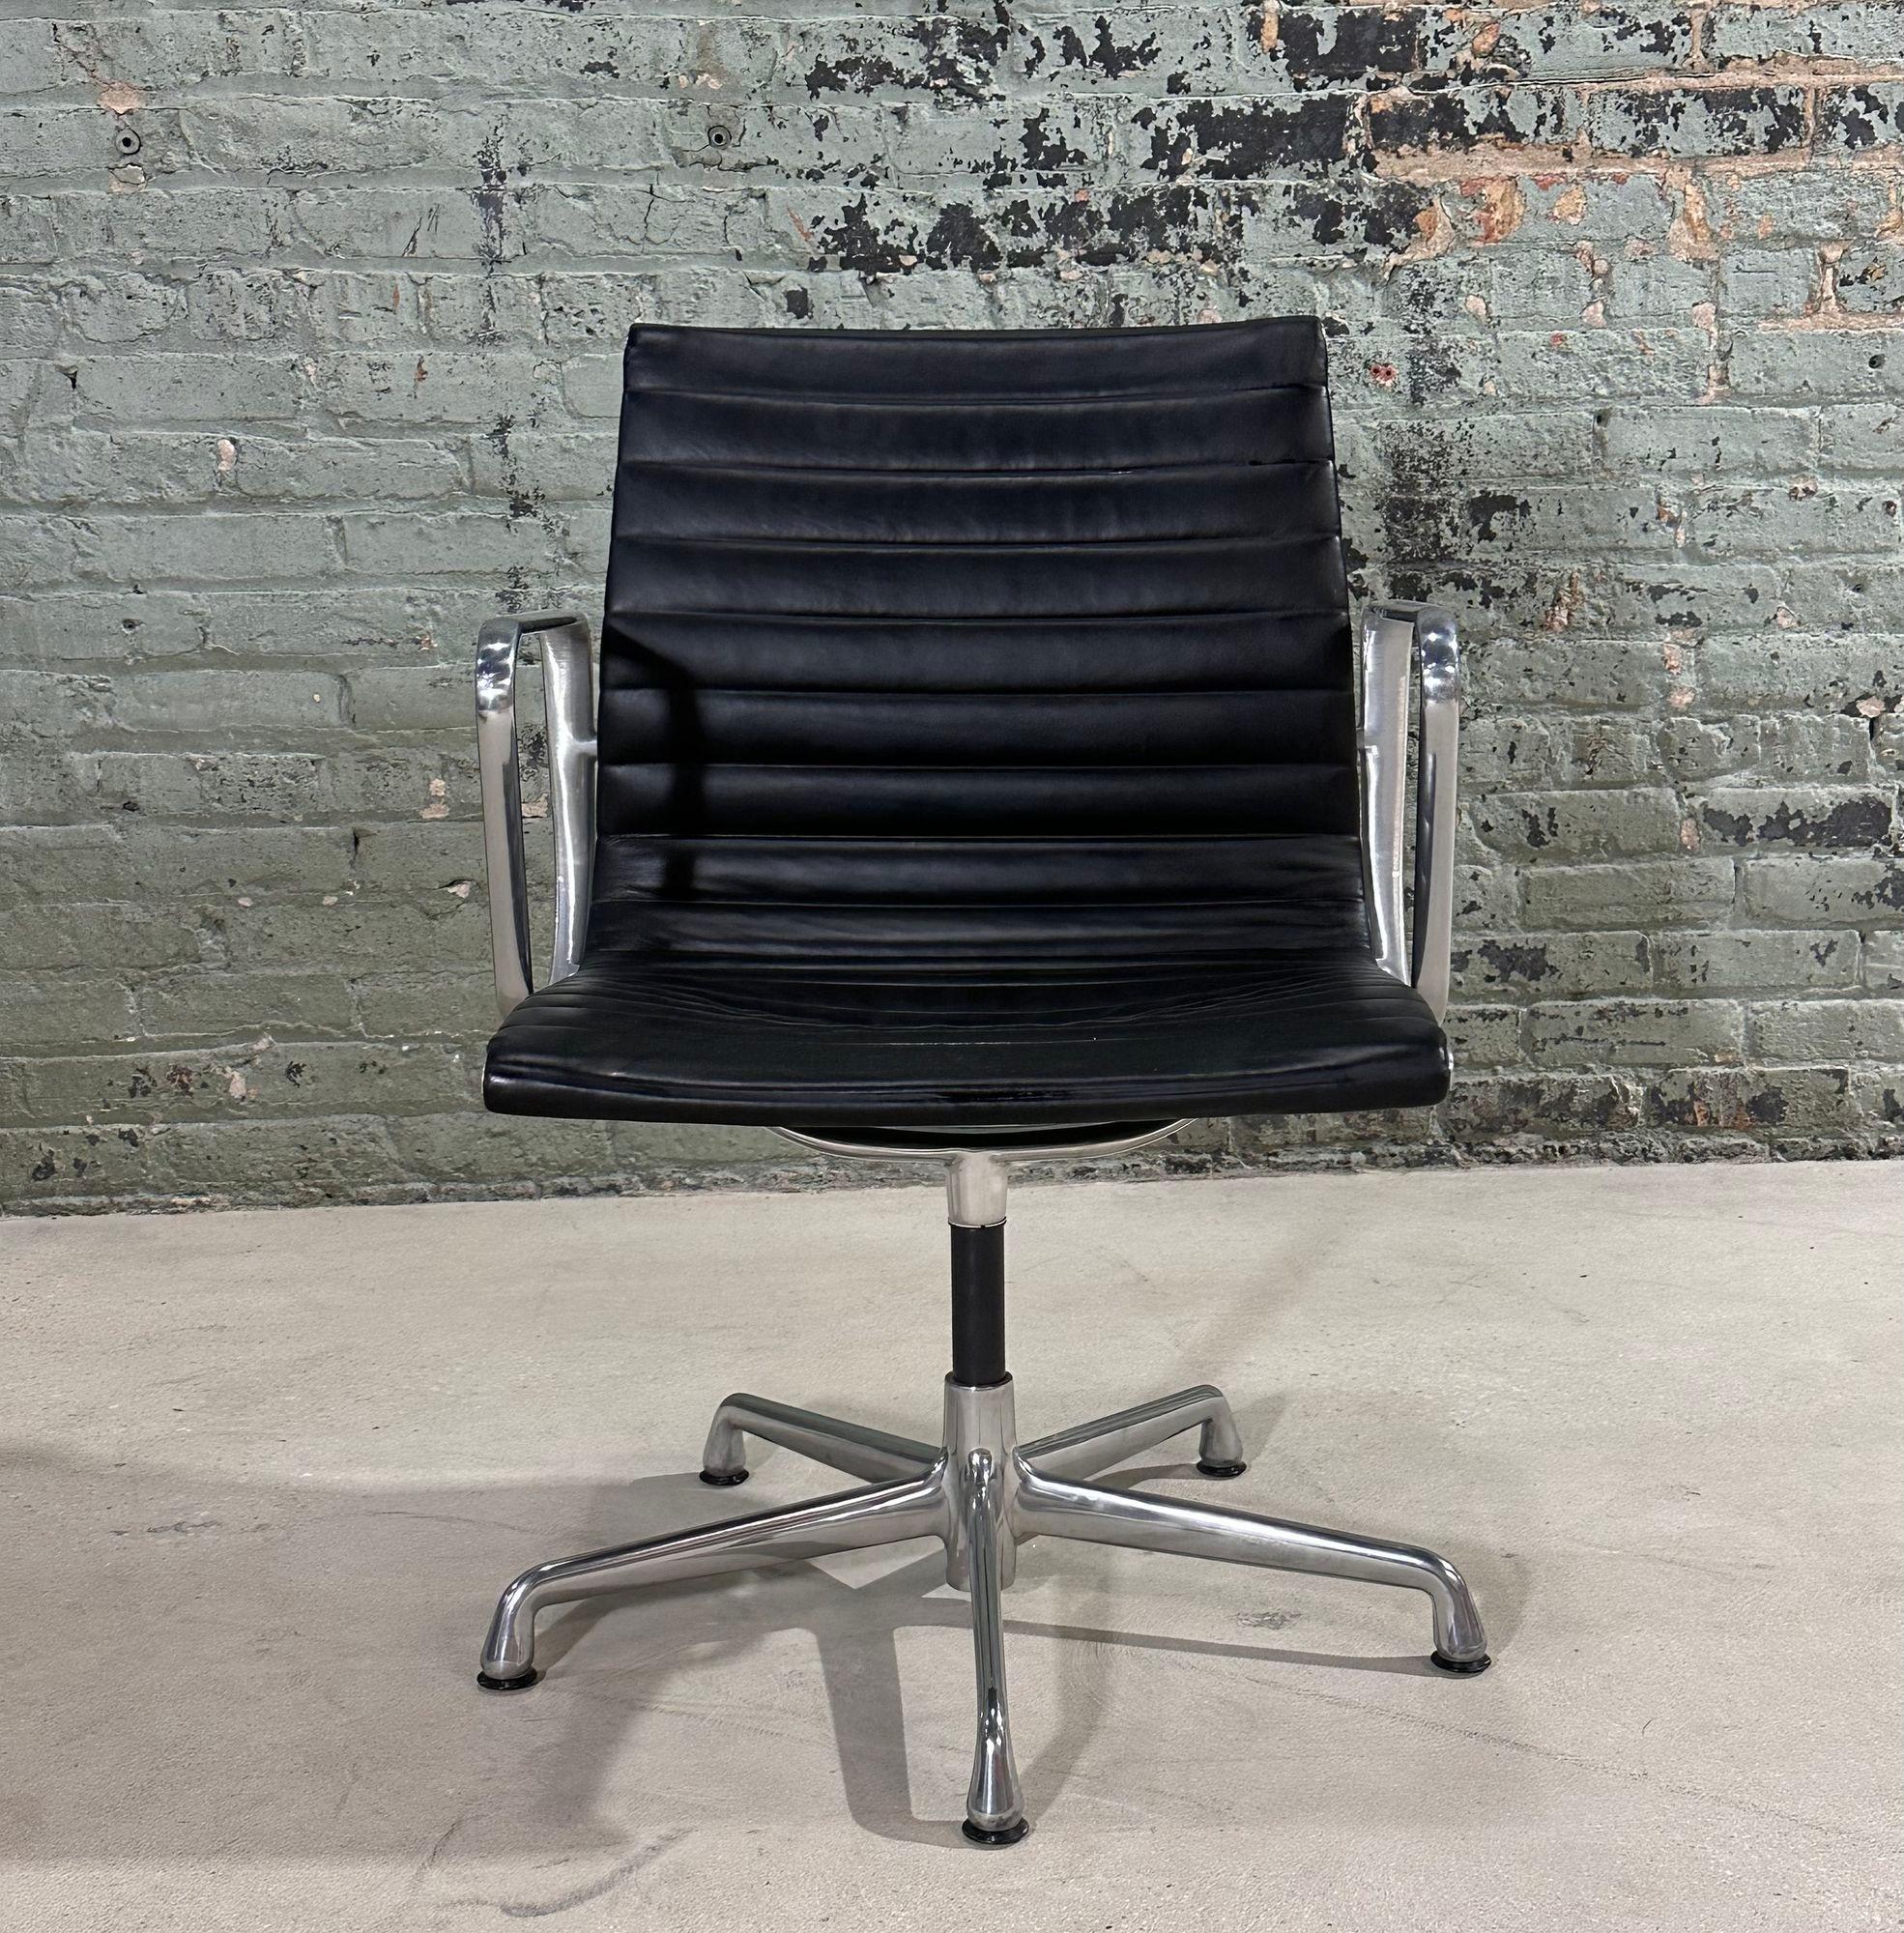 Aluminum Group Desk Chair by Charles Eames for Herman Miller, Signed on bottom.  Black leather with aluminum base.